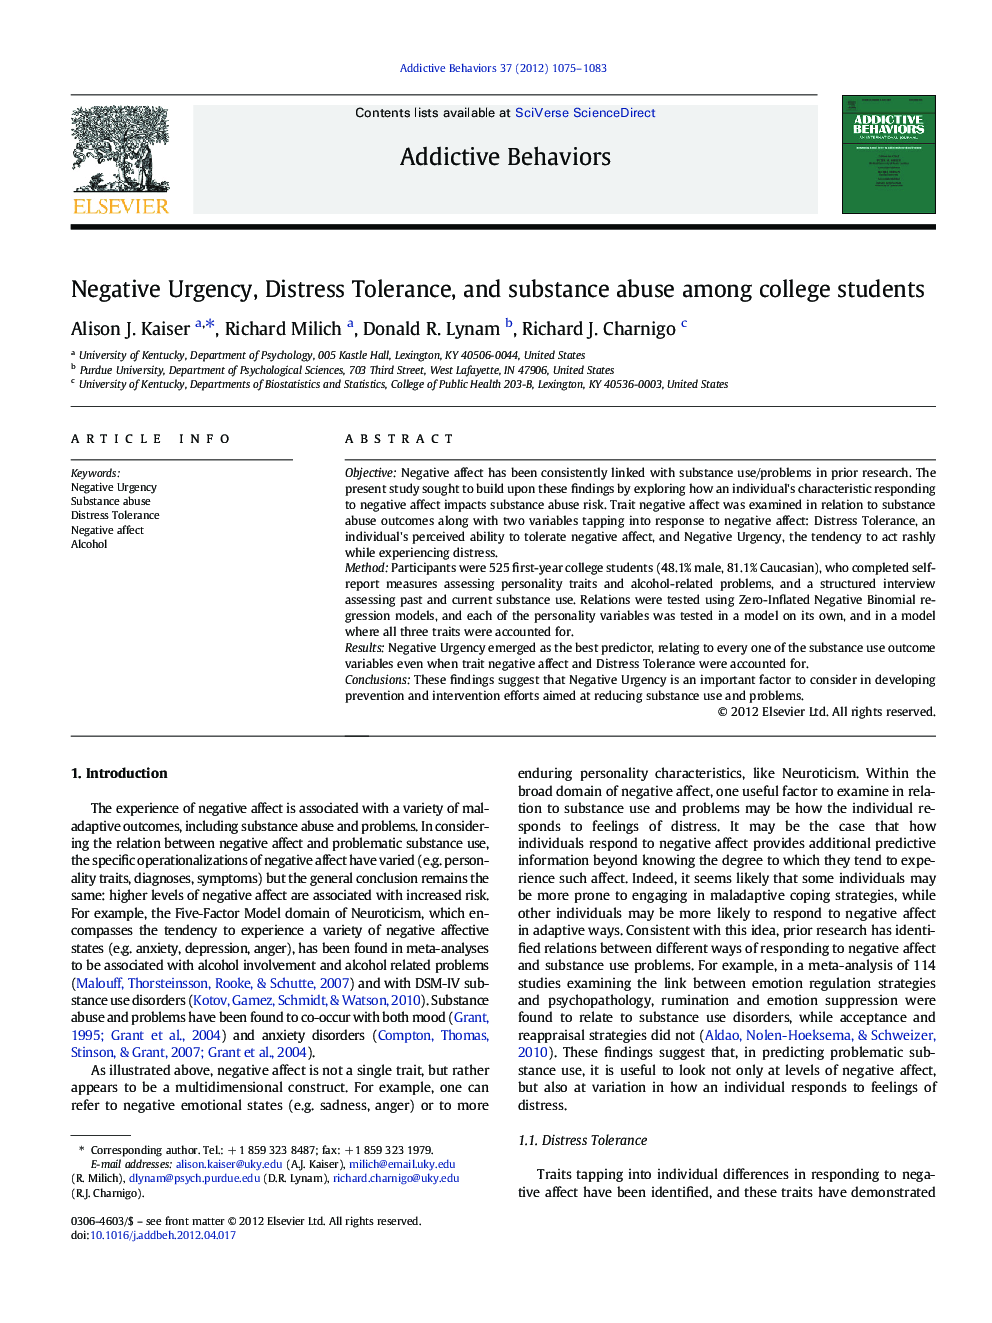 Negative Urgency, Distress Tolerance, and substance abuse among college students